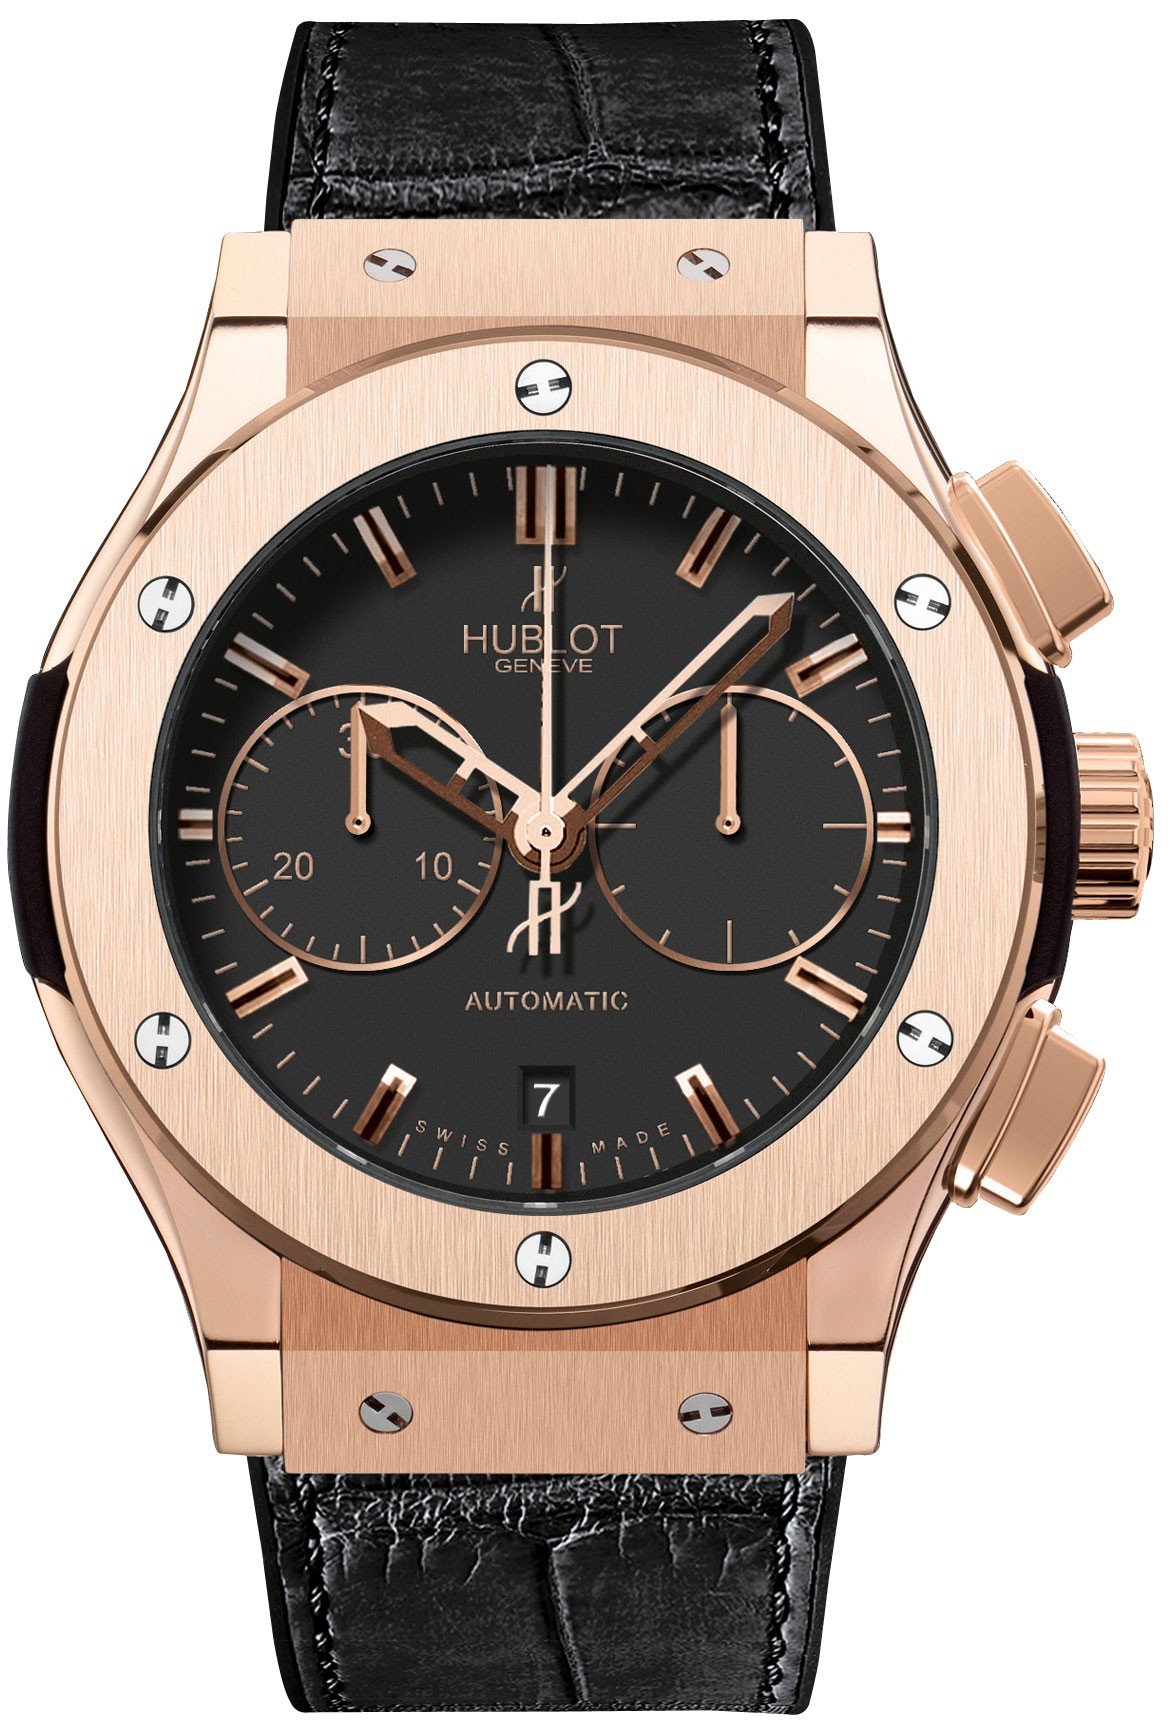 Classic Fusion Chronograph in Rose Gold On Black Alligator Gummy Leather Strap with Mat Black Dial - Diamond Bezel